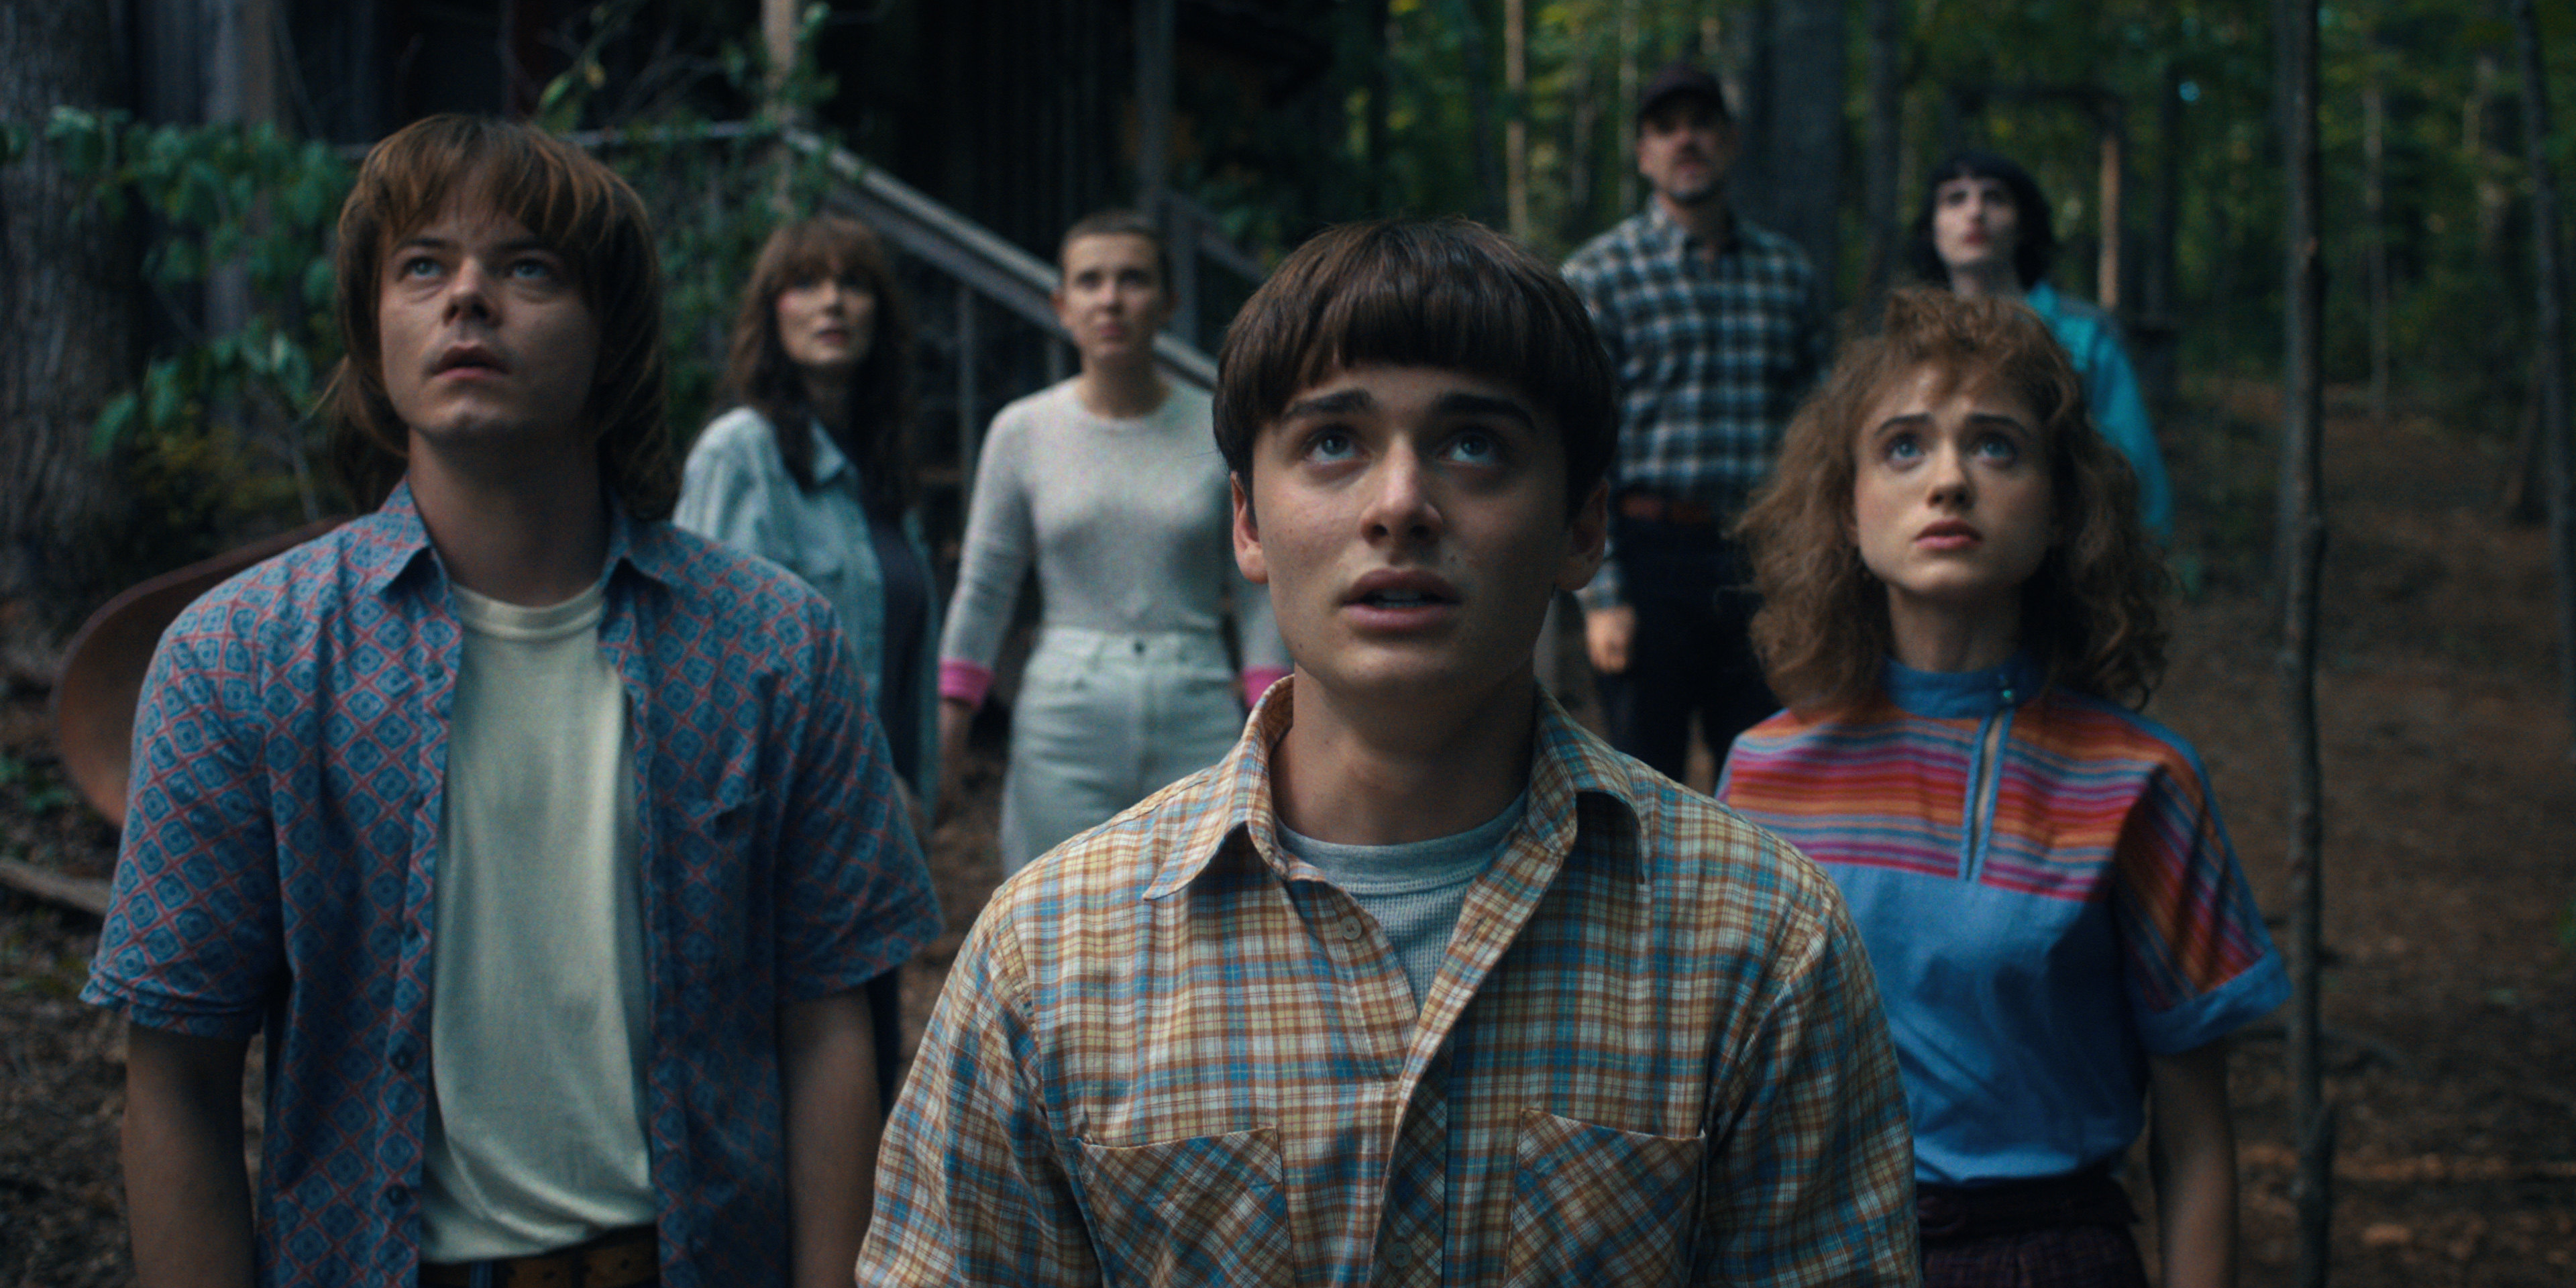 A still from Stranger Things, a runaway success for Netflix. Despite fierce competition from Disney, Apple, Warner Bros and others, Netflix appears to have win the streaming wars. Photo: Netflix